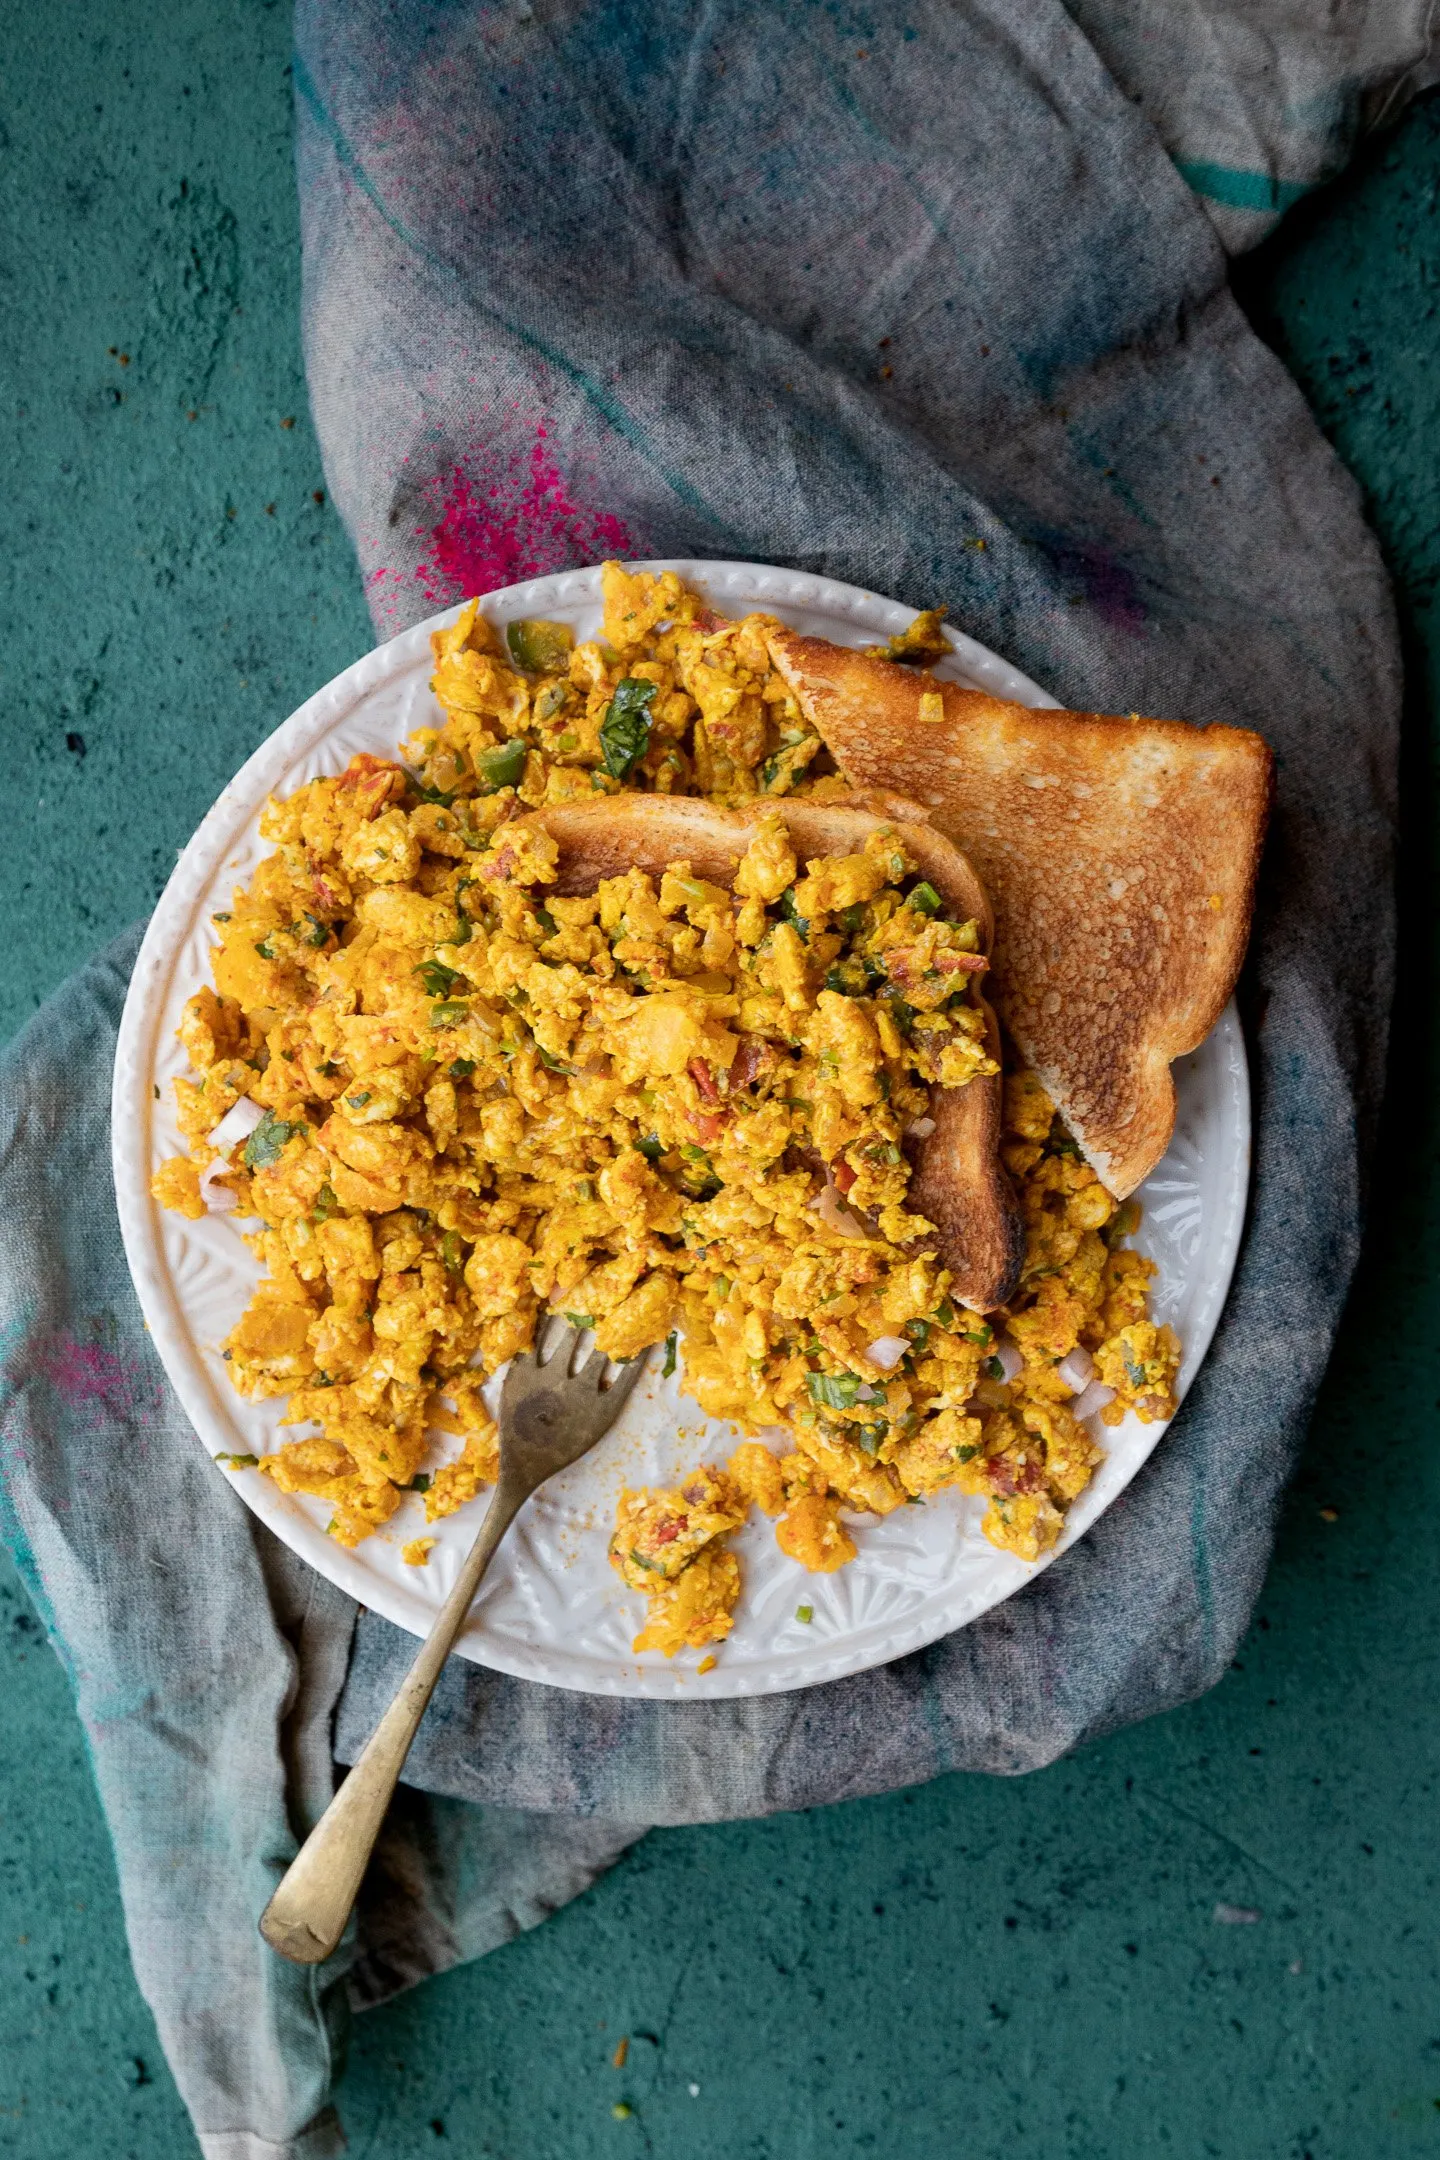 Egg bhurji on a white plate with a fork and two pieces of toast on a cloth napkin.